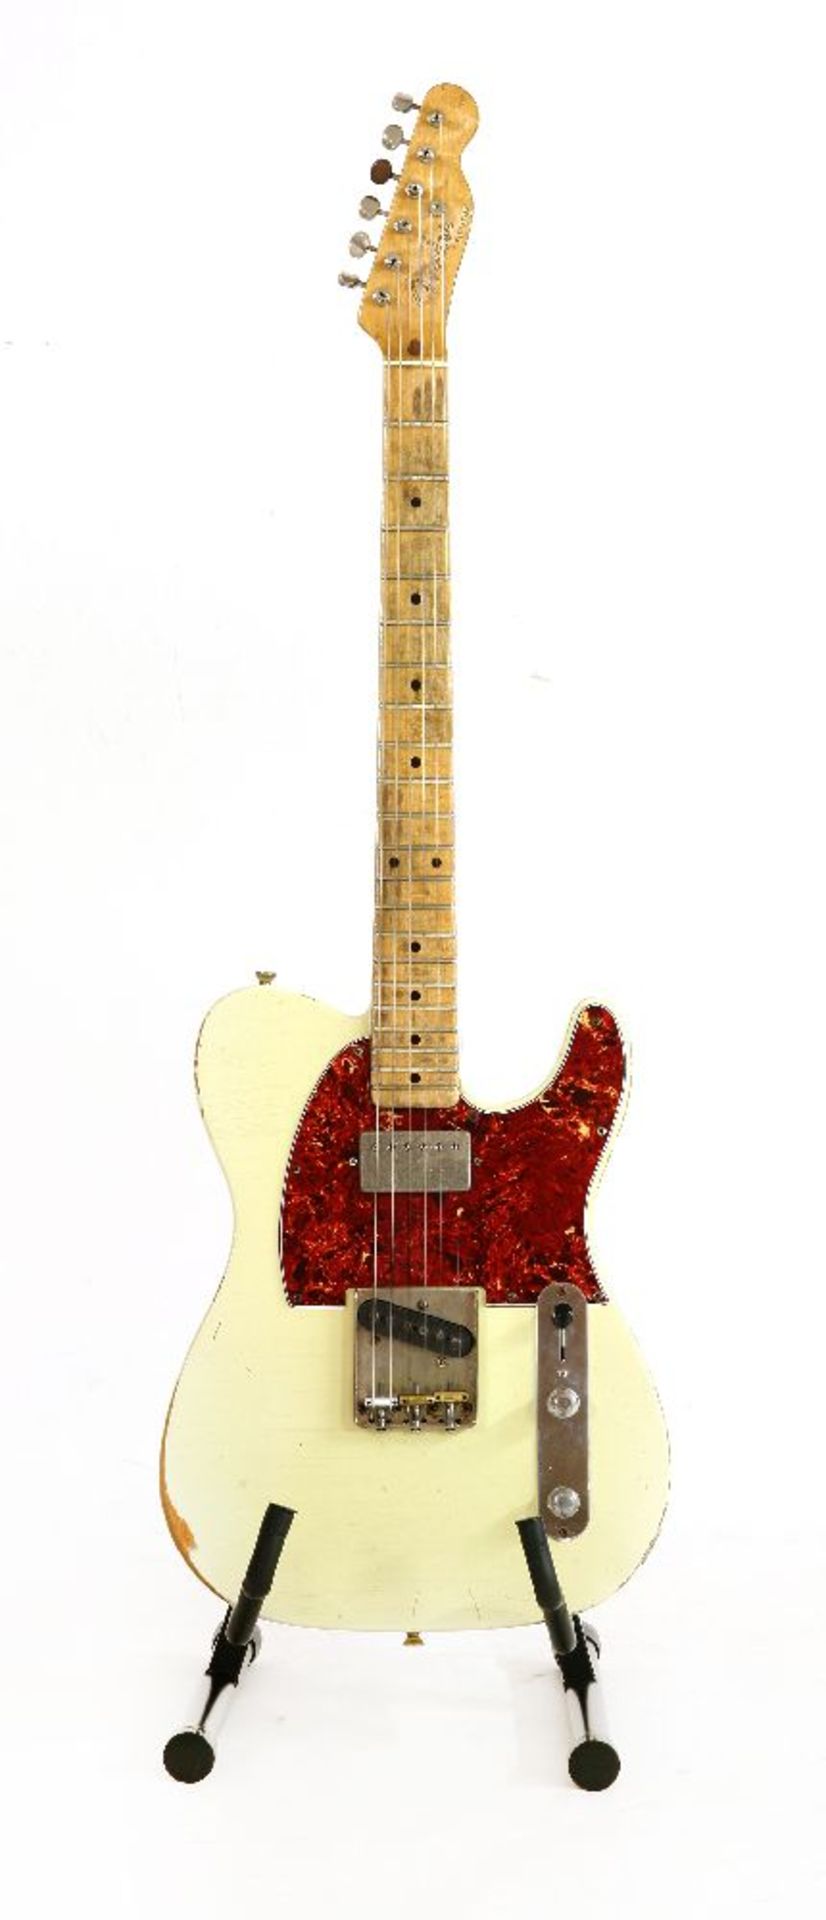 A Fender Telecaster-style electric guitar,the relic finish in off-white by Dominic Henderson echoing